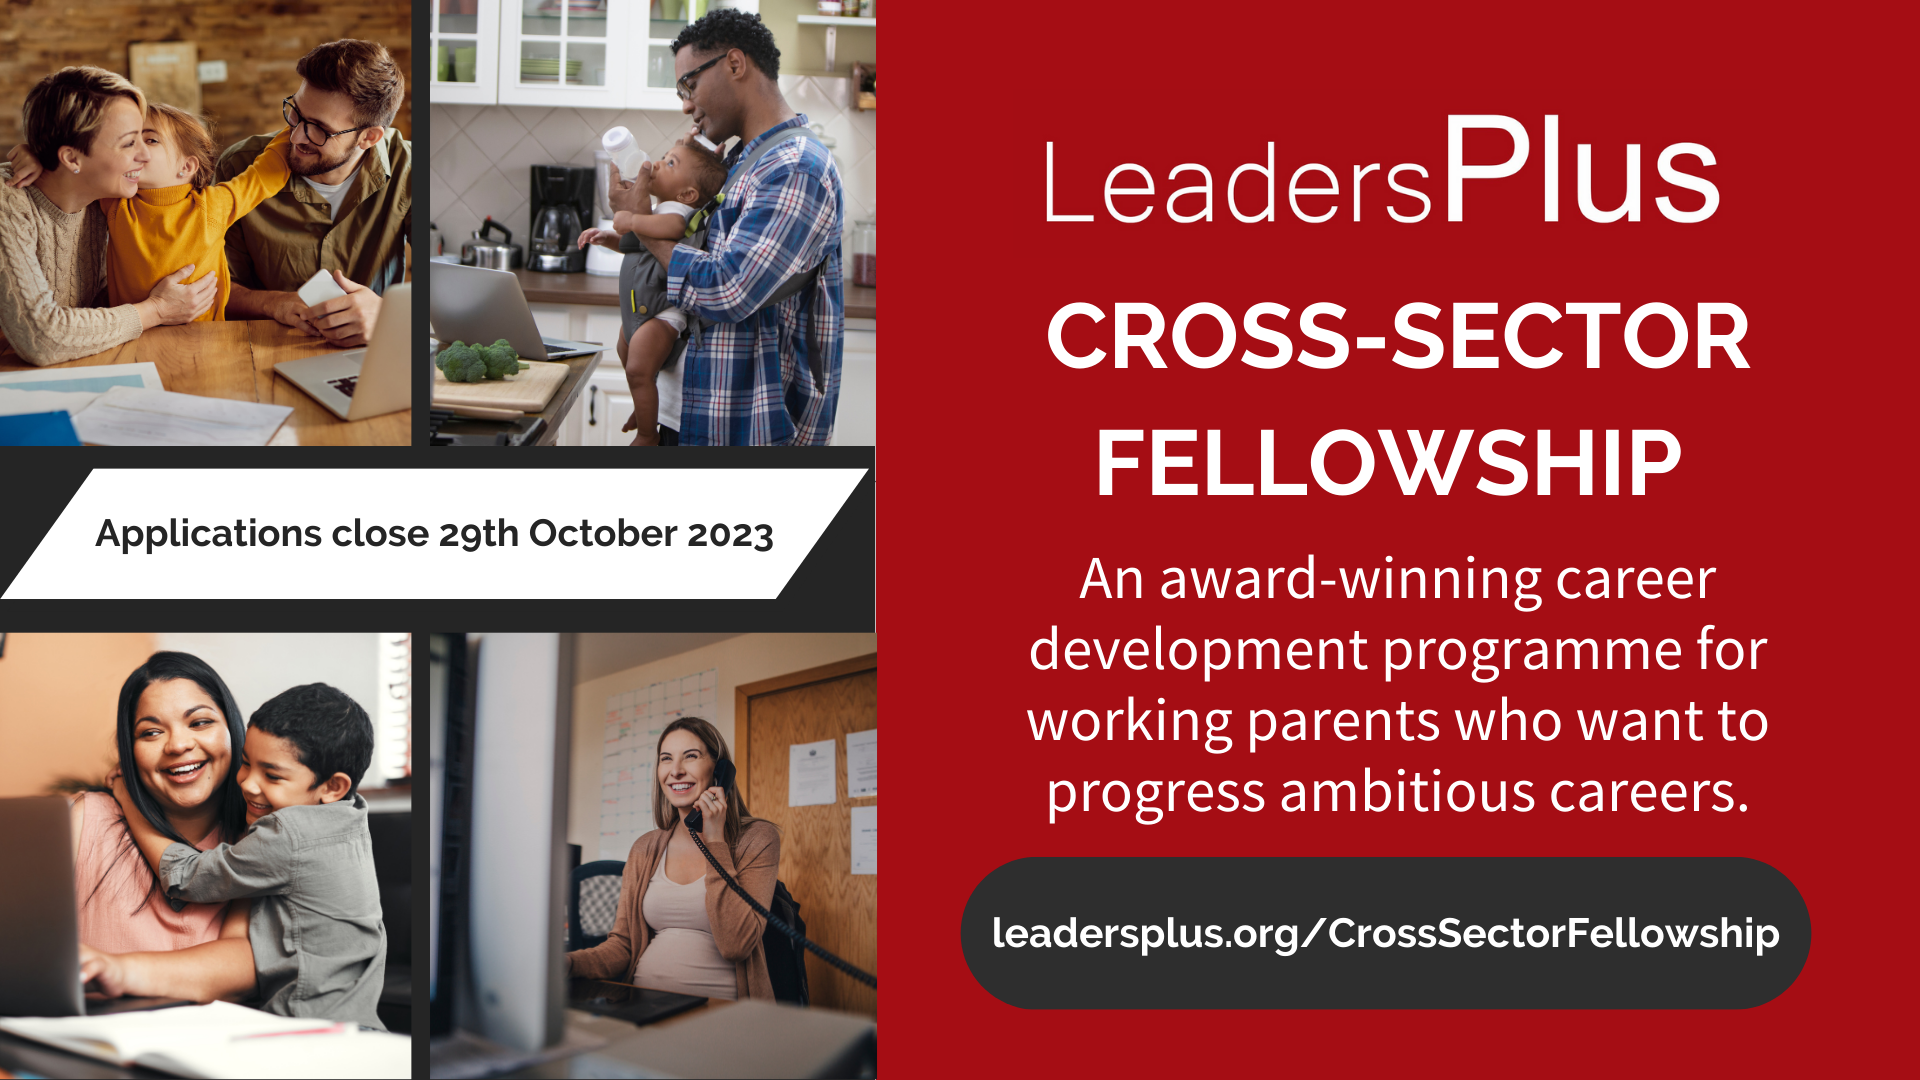 Parents, there is less than a month left to apply – Progress Your Career with the Leaders Plus Fellowship